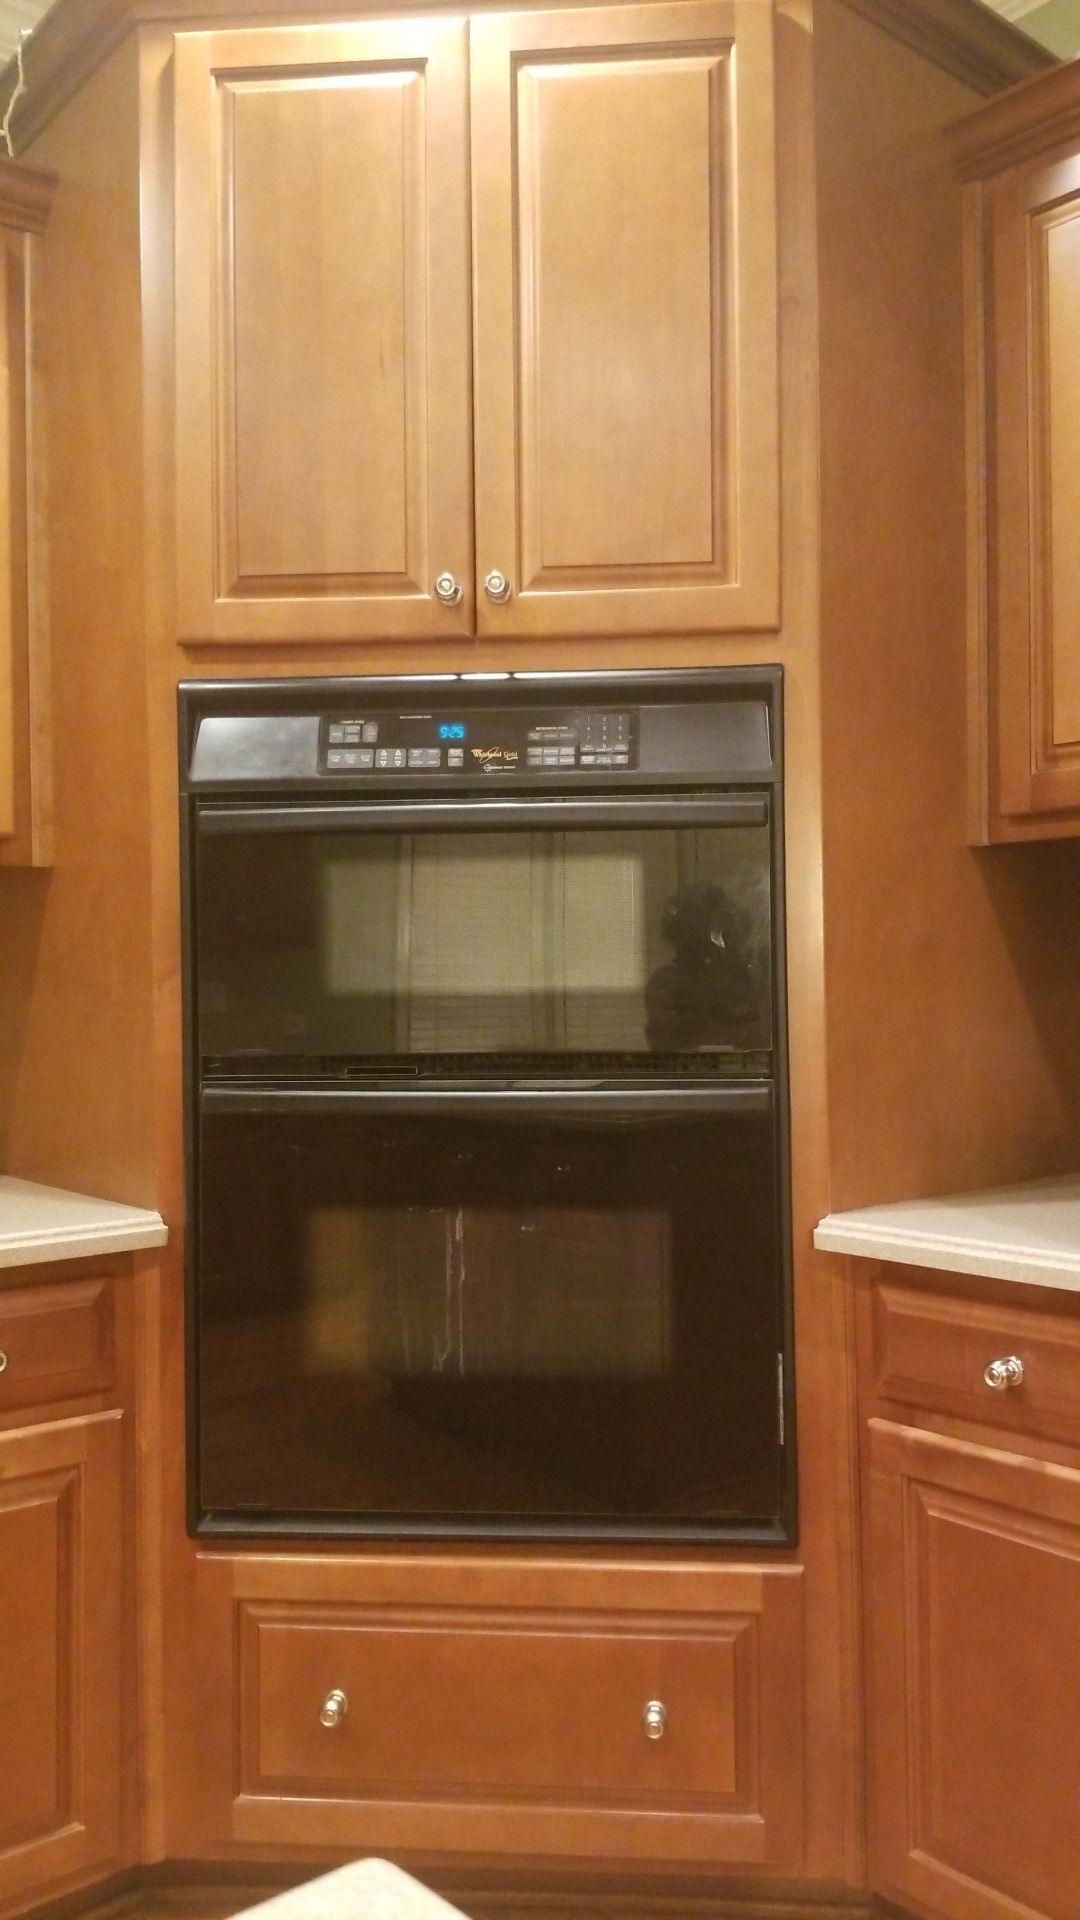 Whirlpool Gold Black Microwave and Oven Combo Wall Oven 30 inches Wide